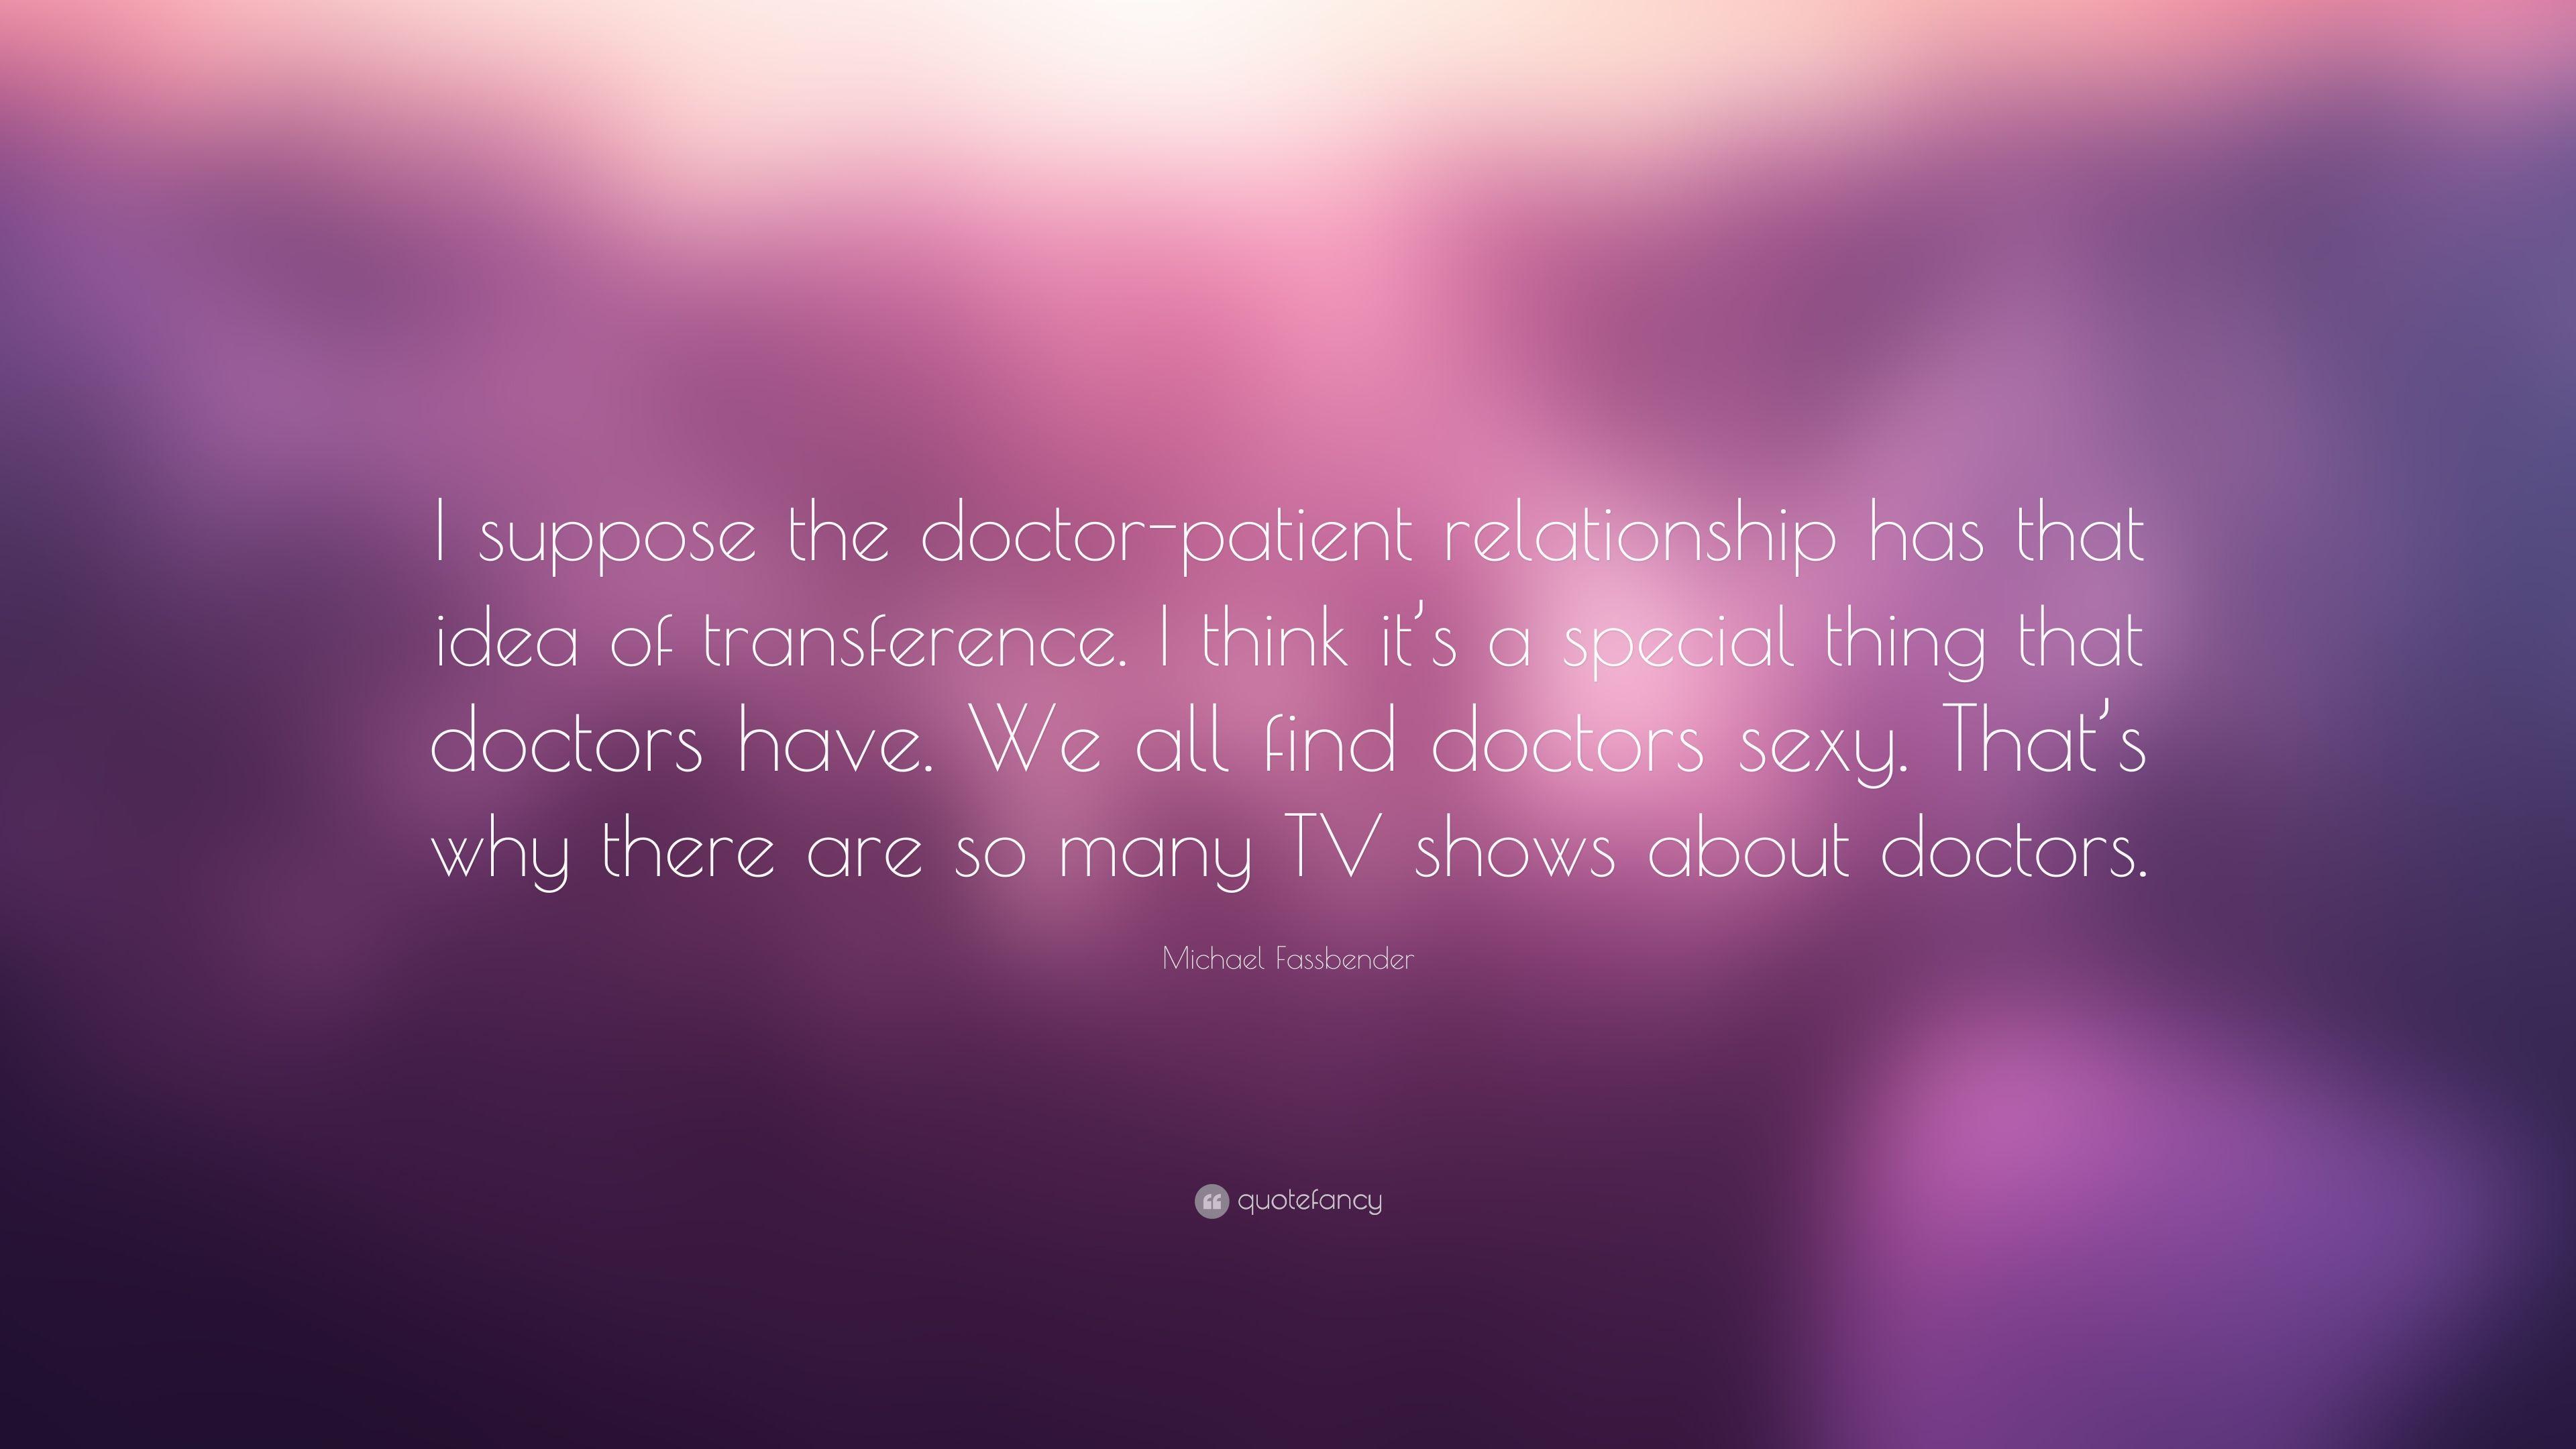 Michael Fassbender Quote: “I Suppose The Doctor Patient Relationship